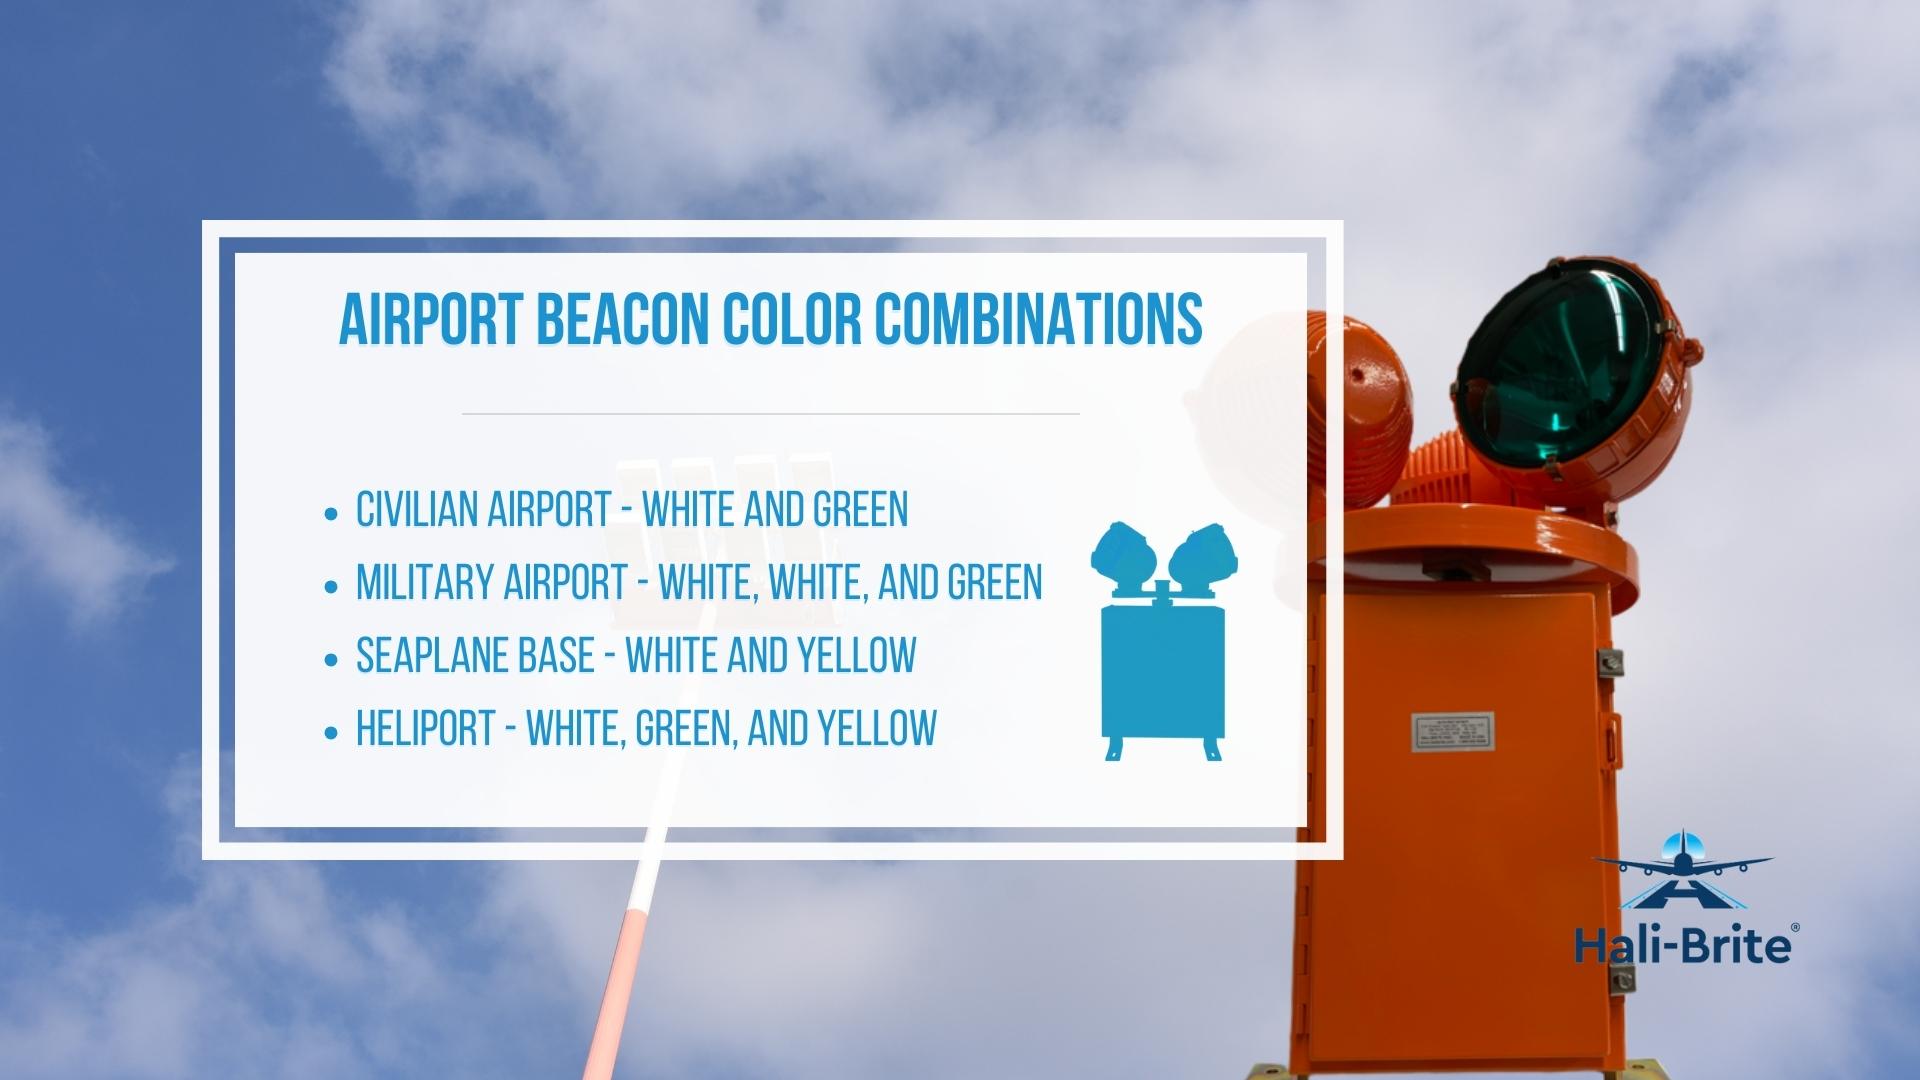 Infographic image of airport beacon color combinations